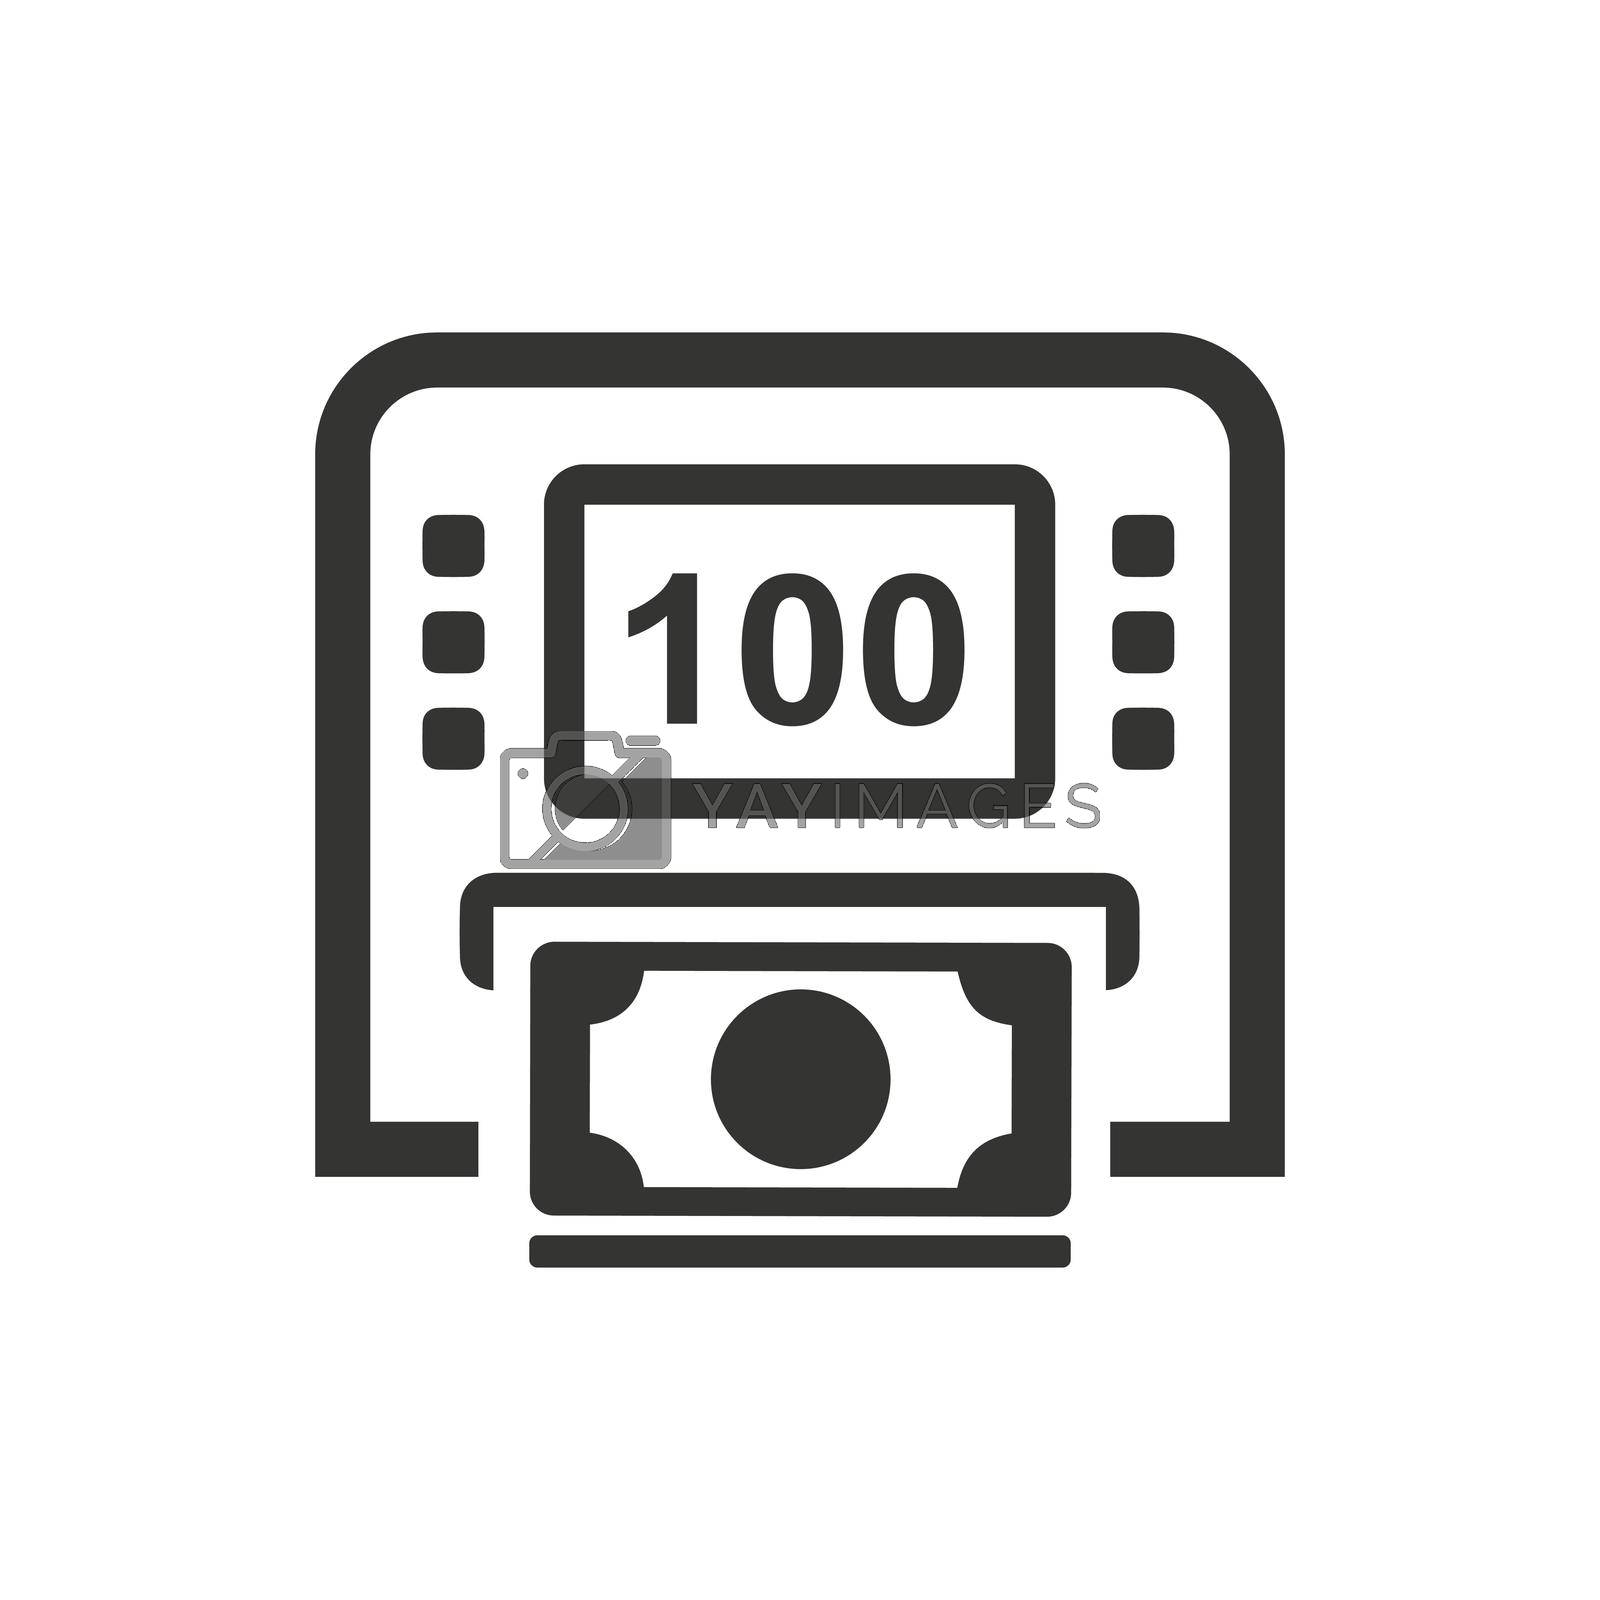 Royalty free image of ATM Cash out Icon by delwar018